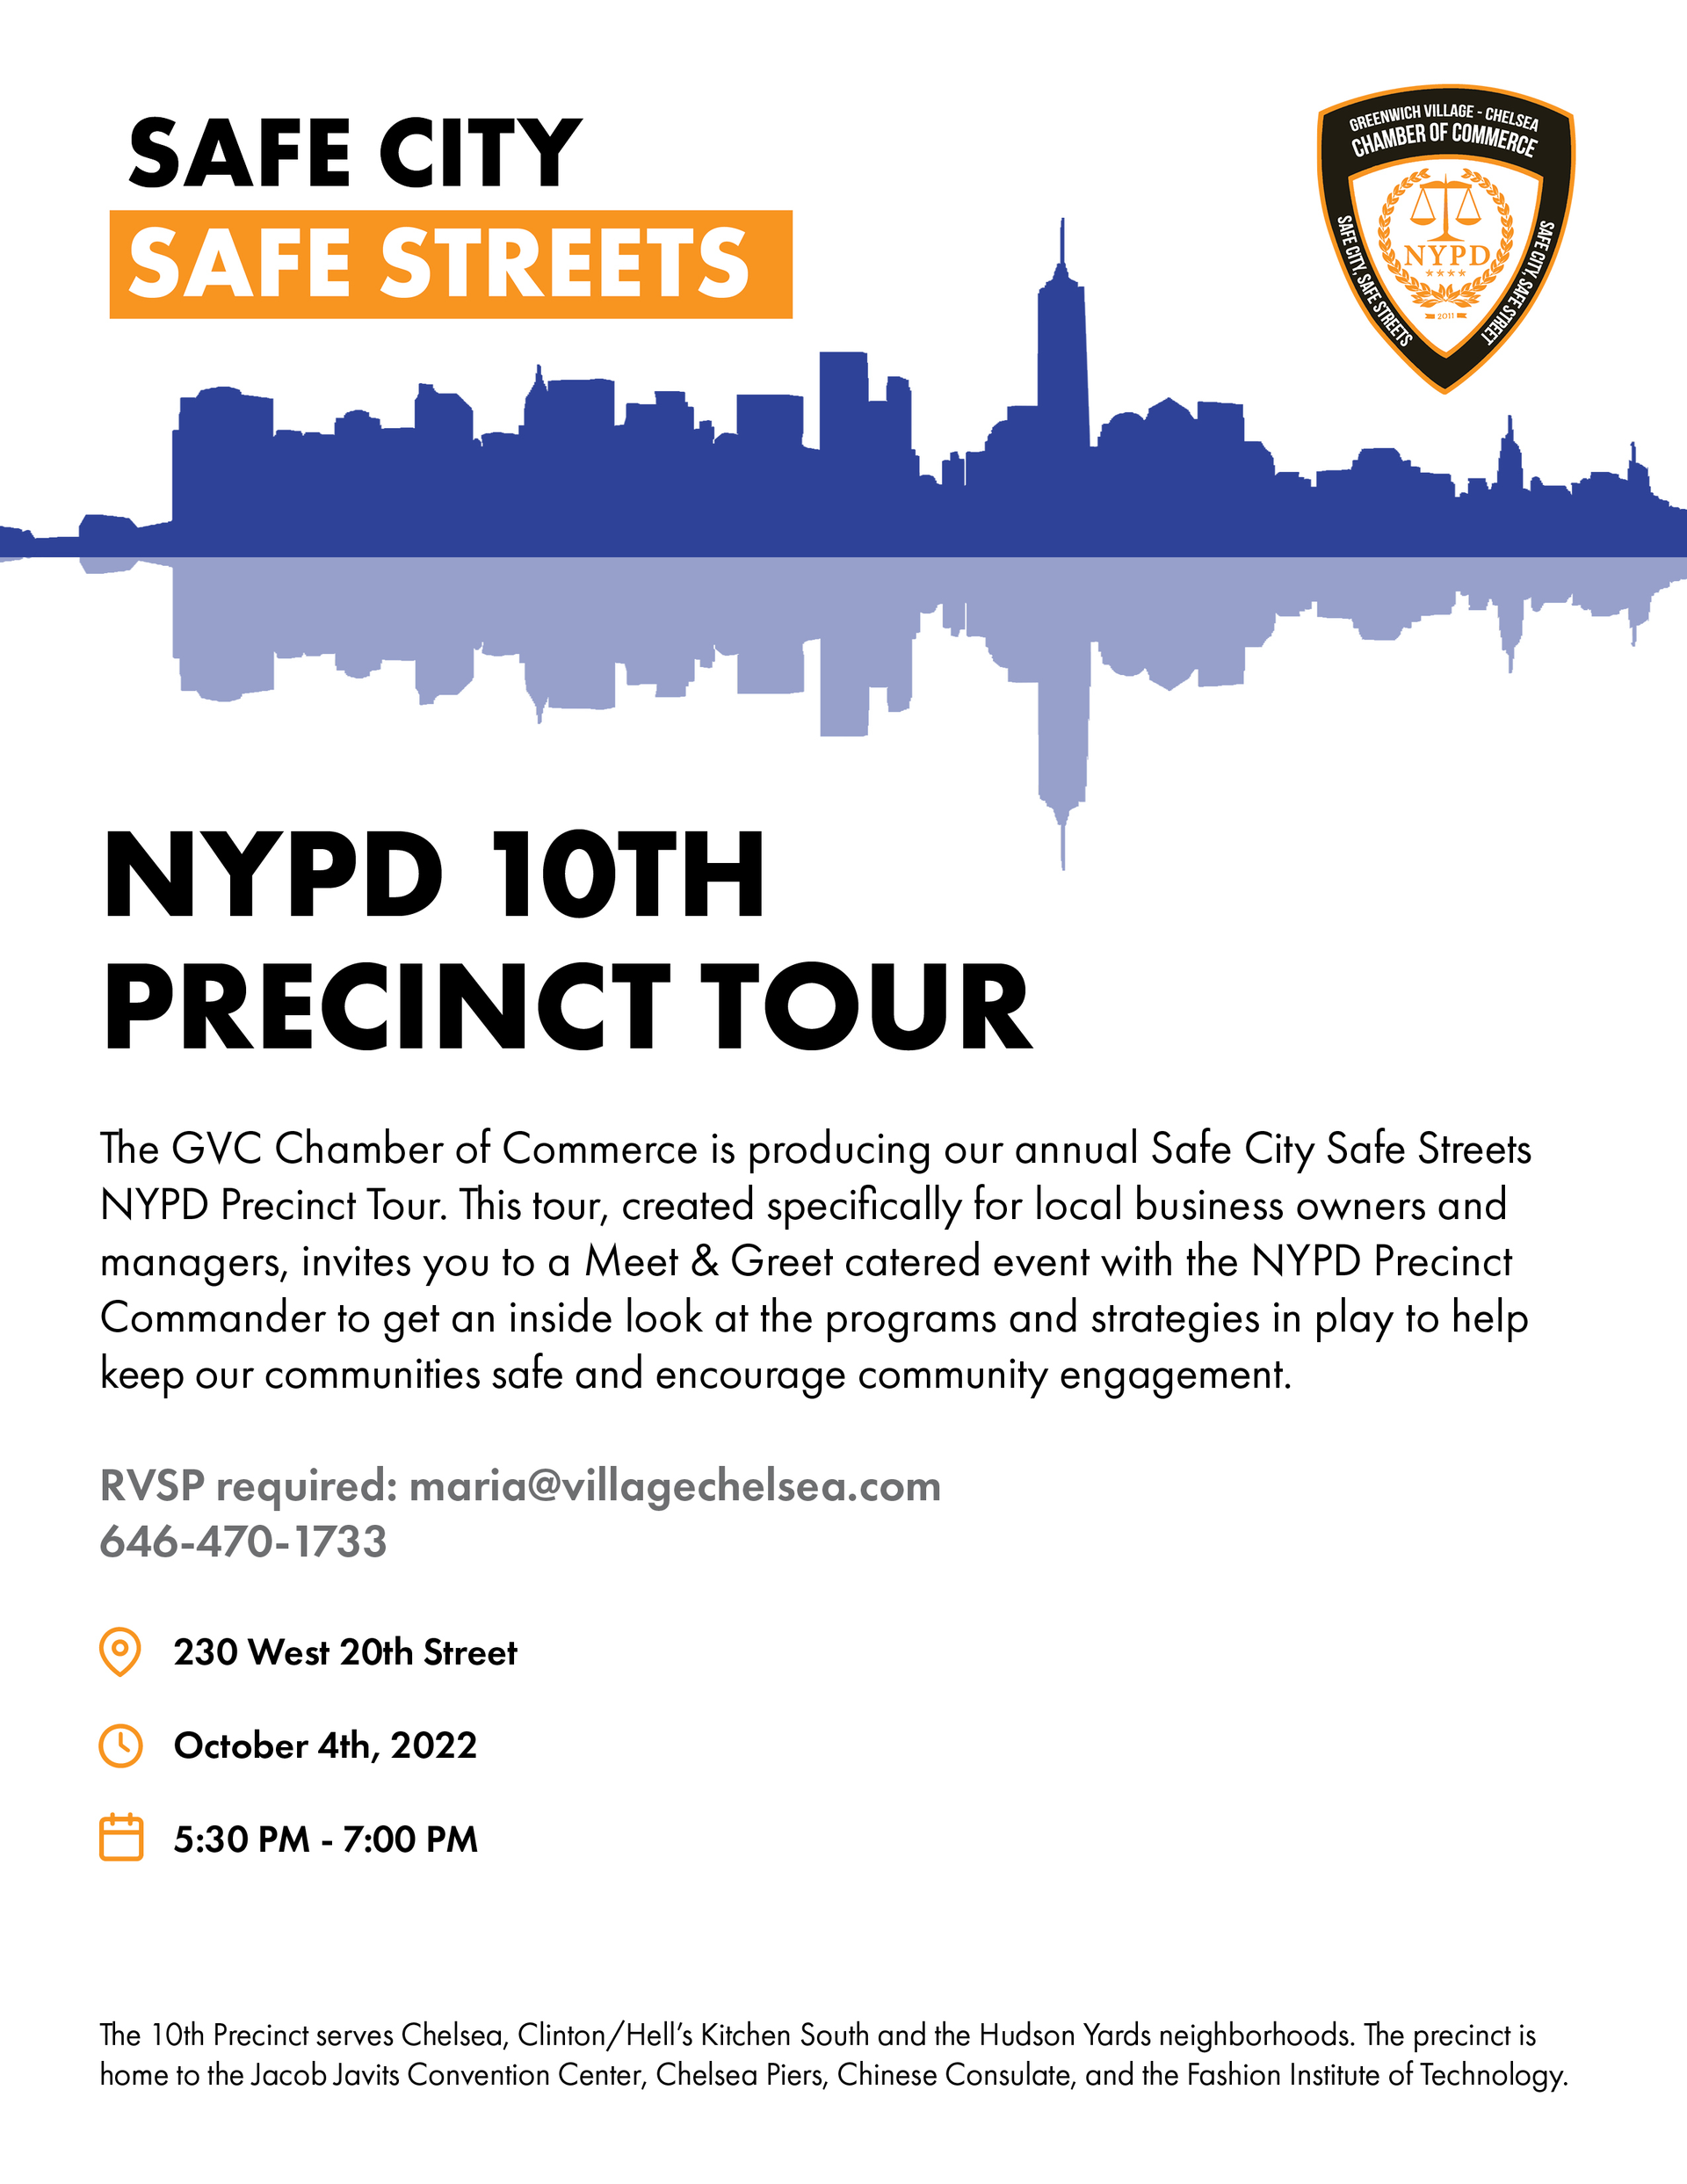 thumbnails Tour of the NYPD 10th Precinct